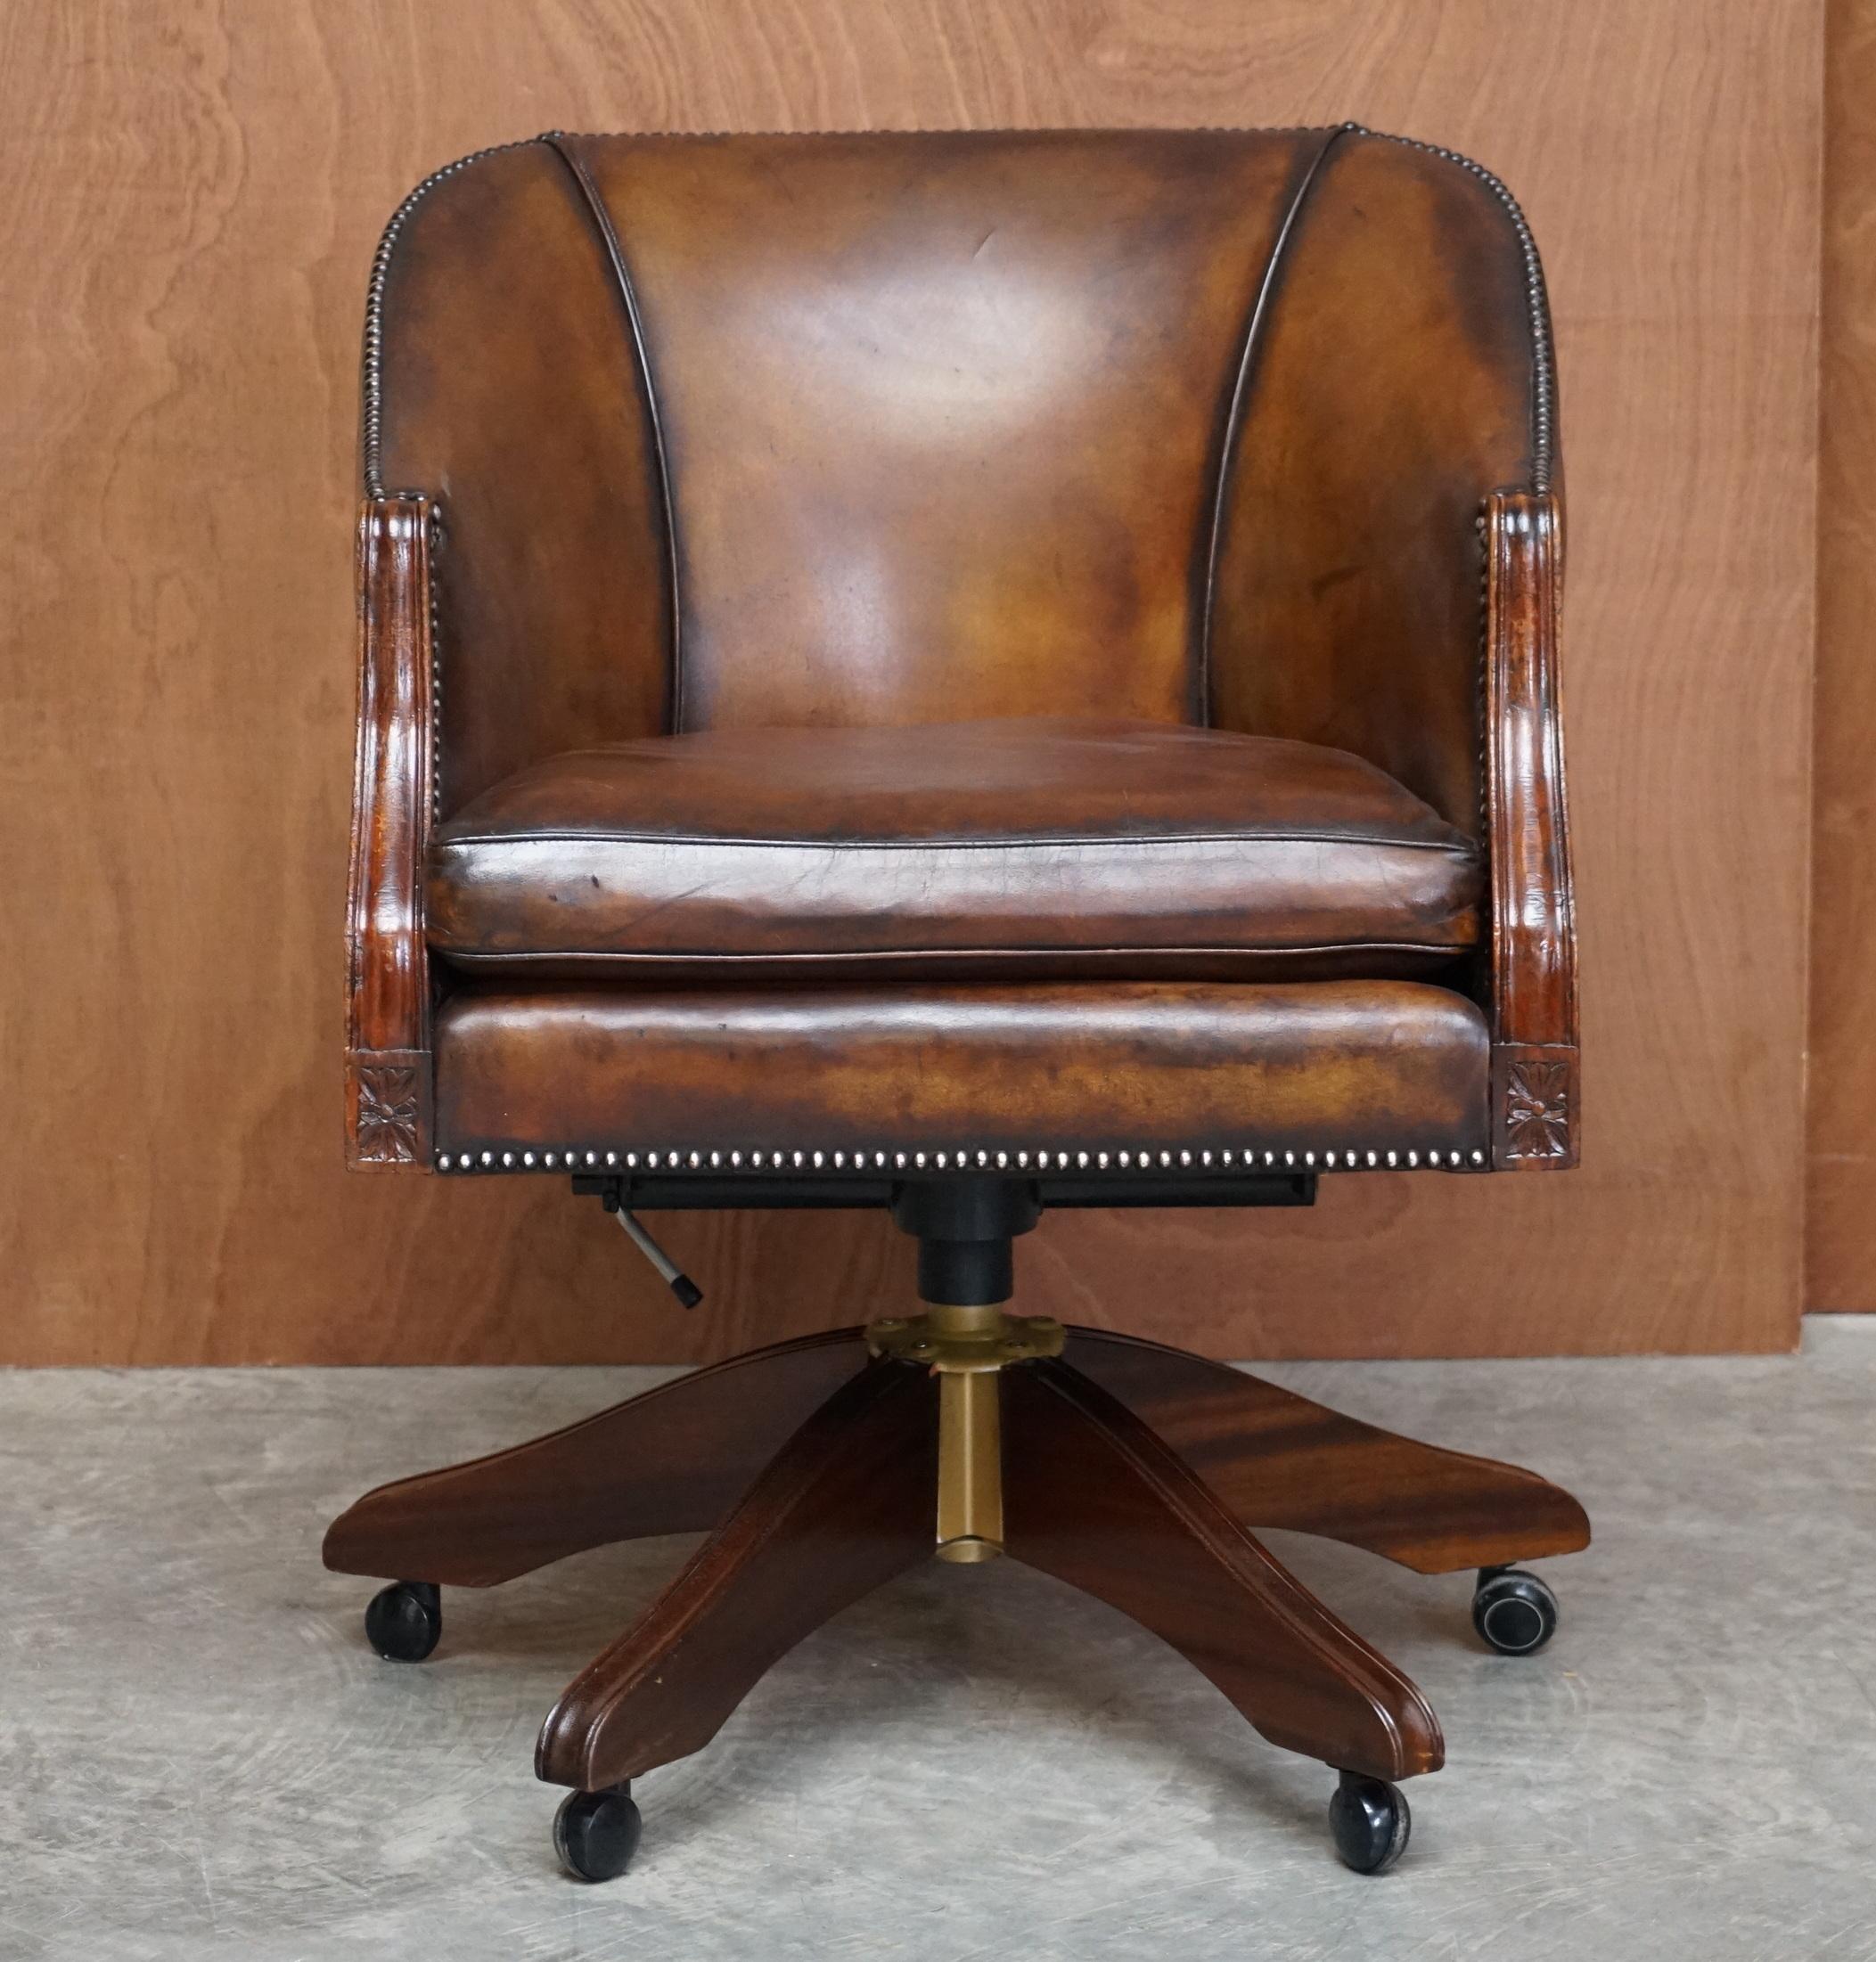 We are delighted to offer for sale this fully restored vintage Barrell back hand dyed brown leather office chair.

This chair is really quite exquisite, the frame is solid beech, the leather lovely thick English hide, the base swivels and it has